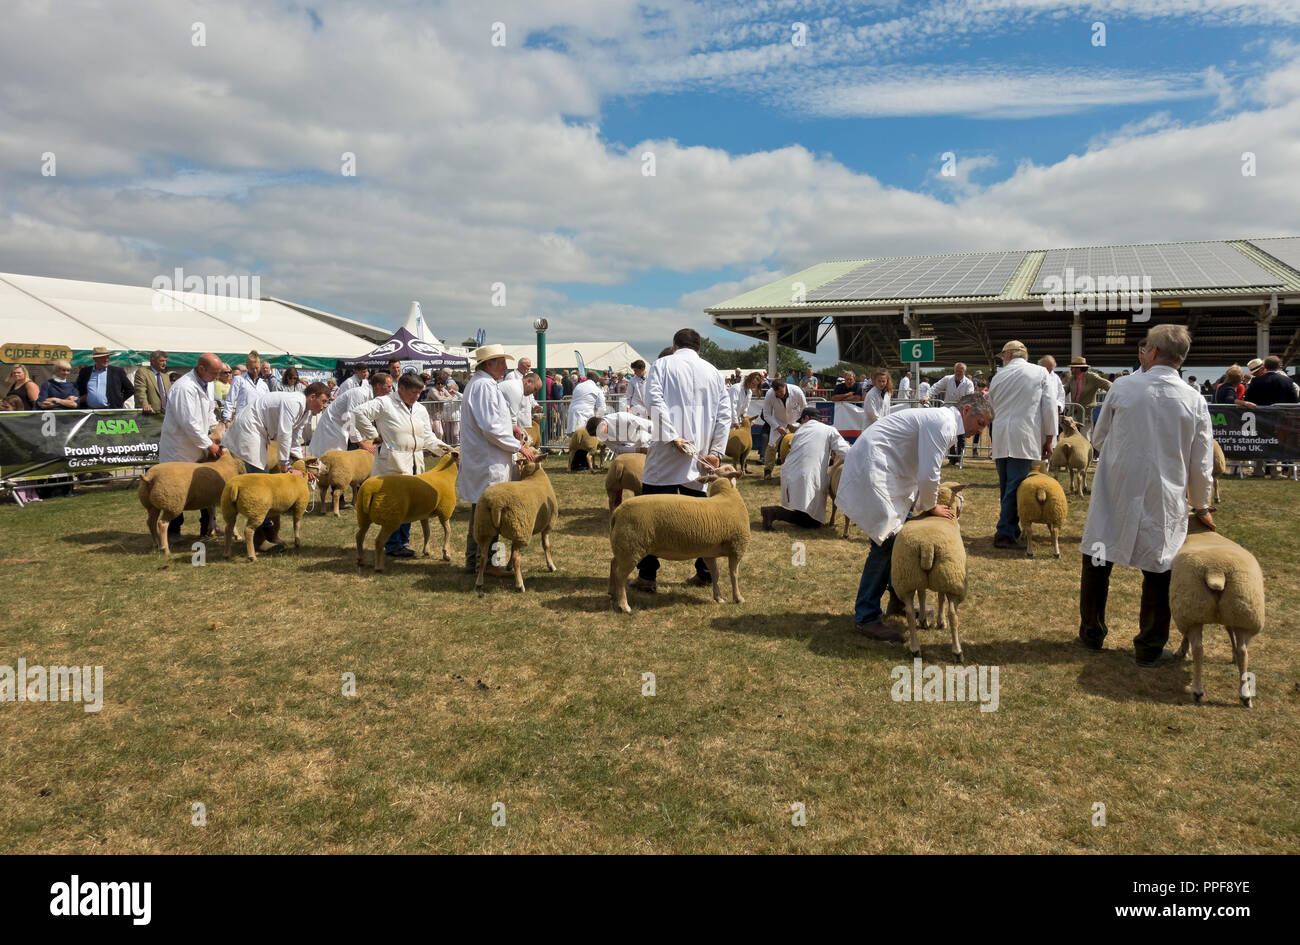 Farmers showing their British Charollais sheep at the Great Yorkshire Show in summer Harrogate North Yorkshire England UK United Kingdom Great Britain Stock Photo